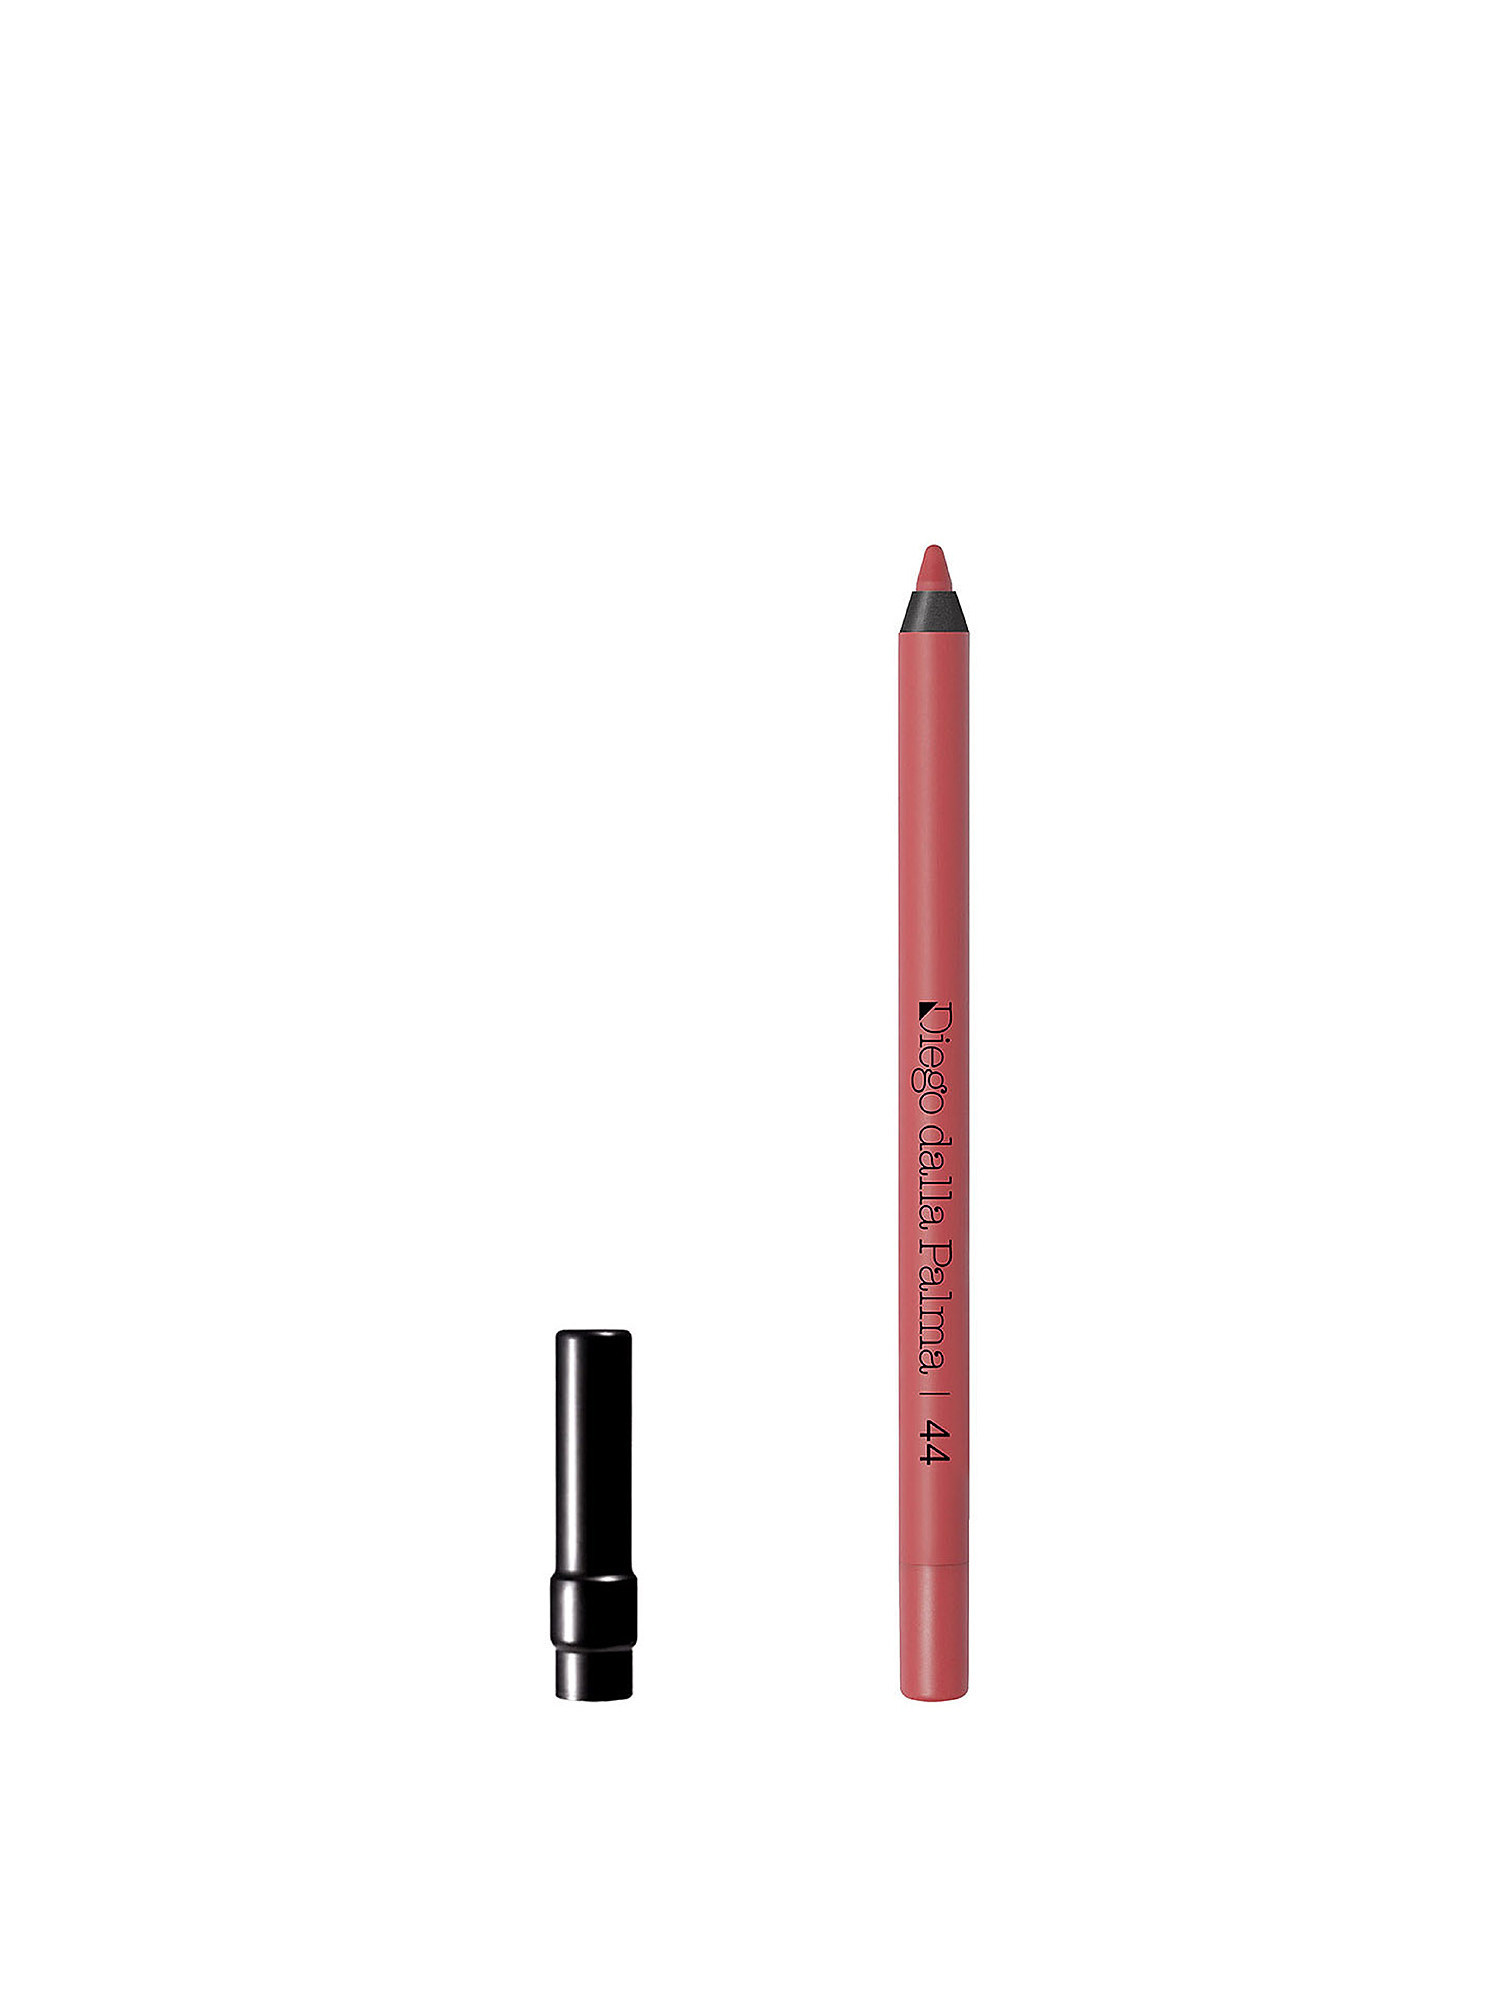 STAY ON ME Lip Liner Long Lasting Water resistant - 44, Antique Pink, large image number 0